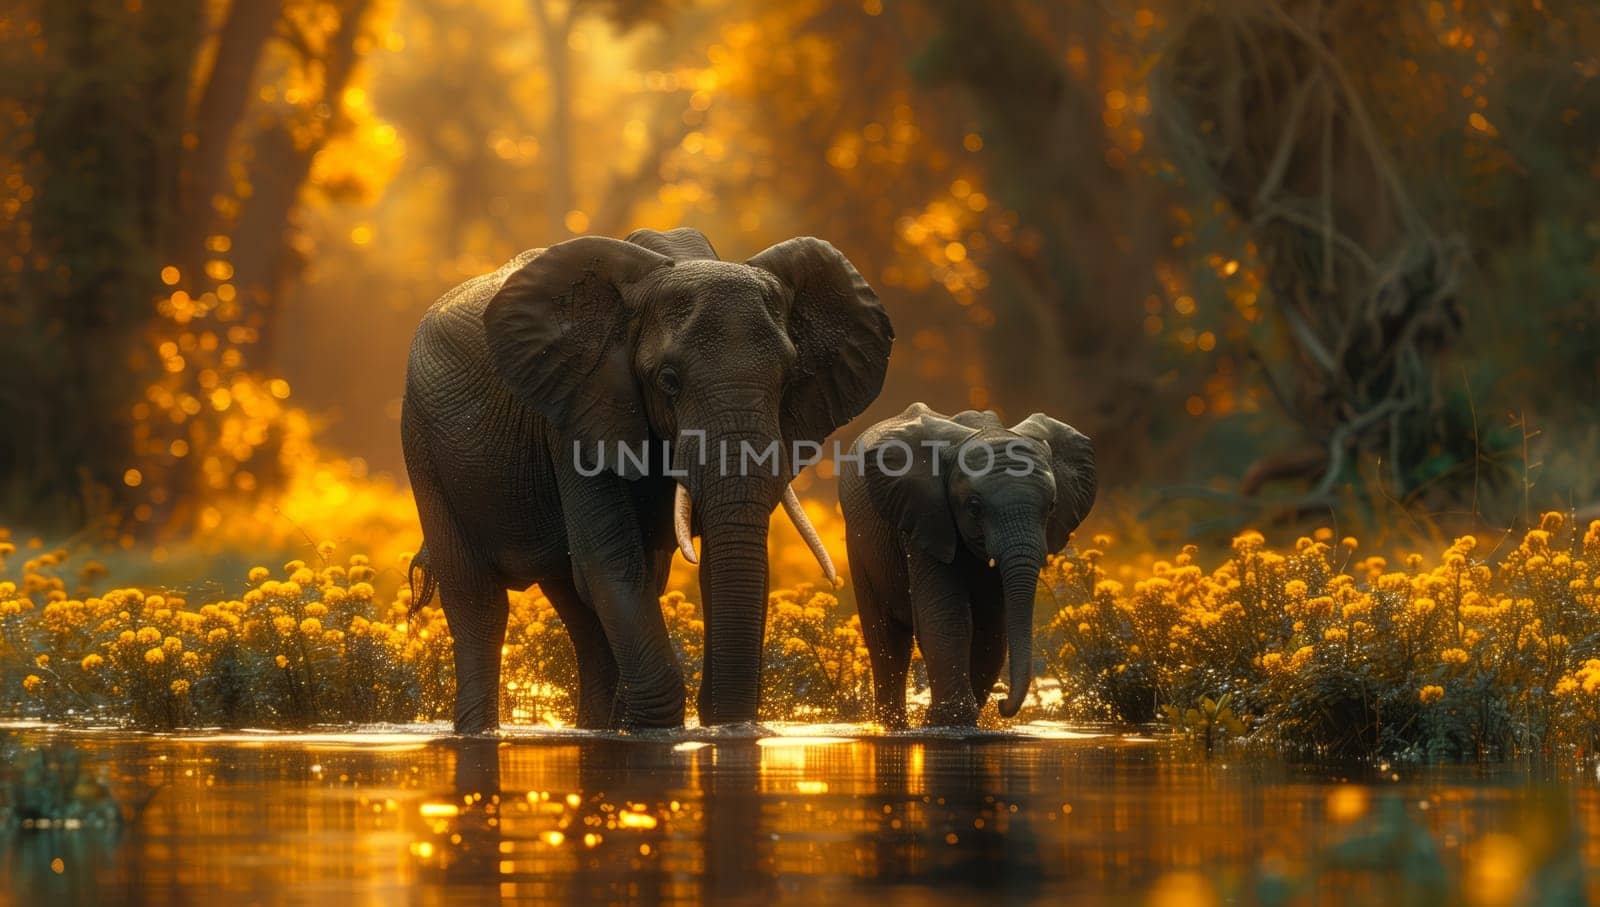 Two elephants in the water, part of natural landscape by richwolf